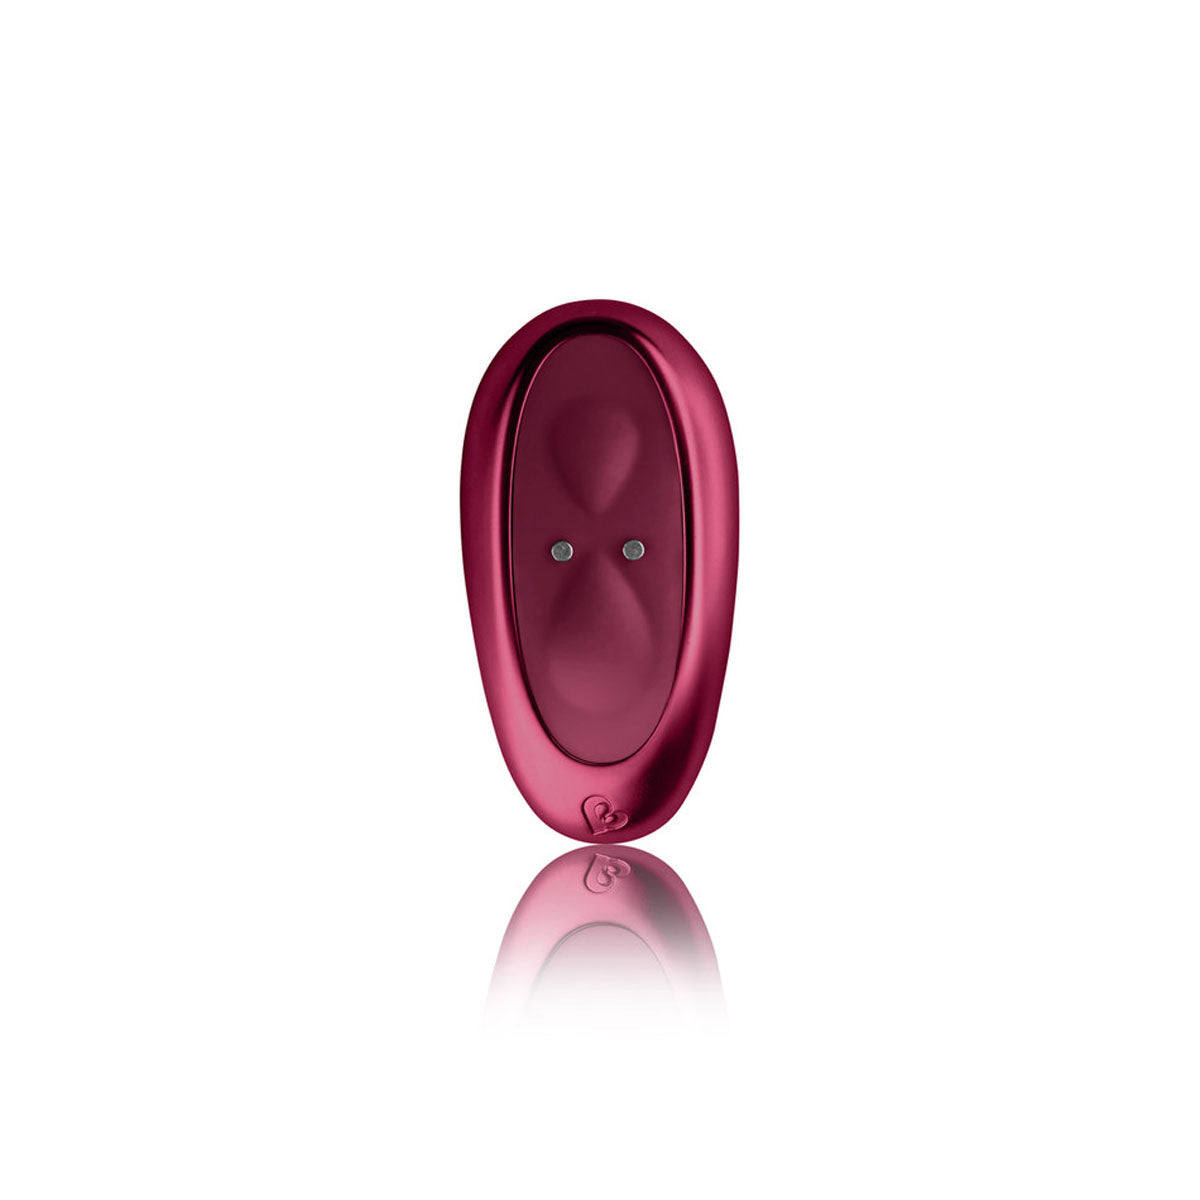 Burgundy silicone and ABS remote with two control buttons for vibrator Nudie Co